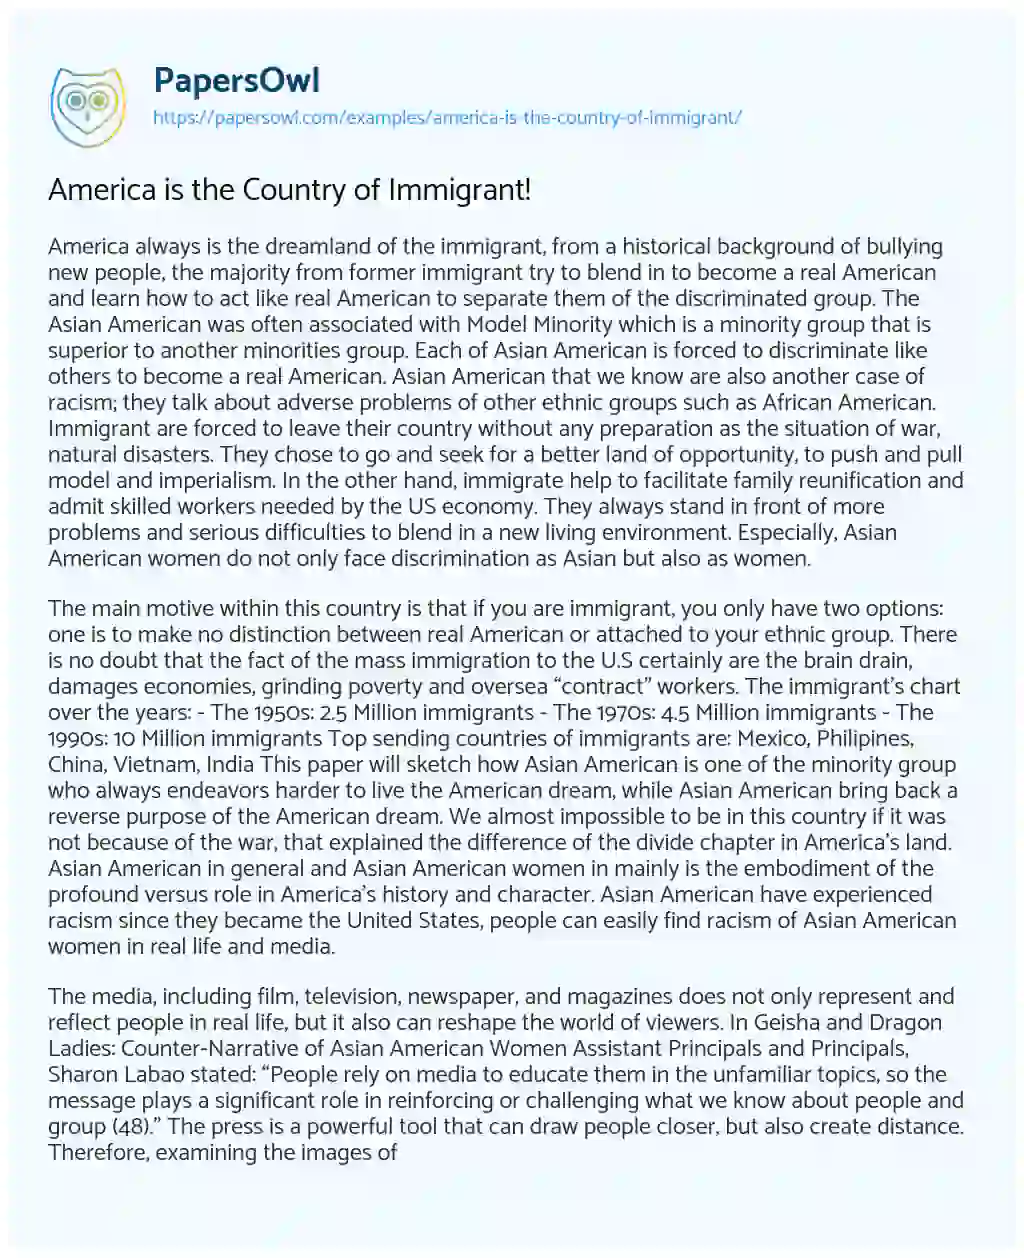 Essay on America is the Country of Immigrant!